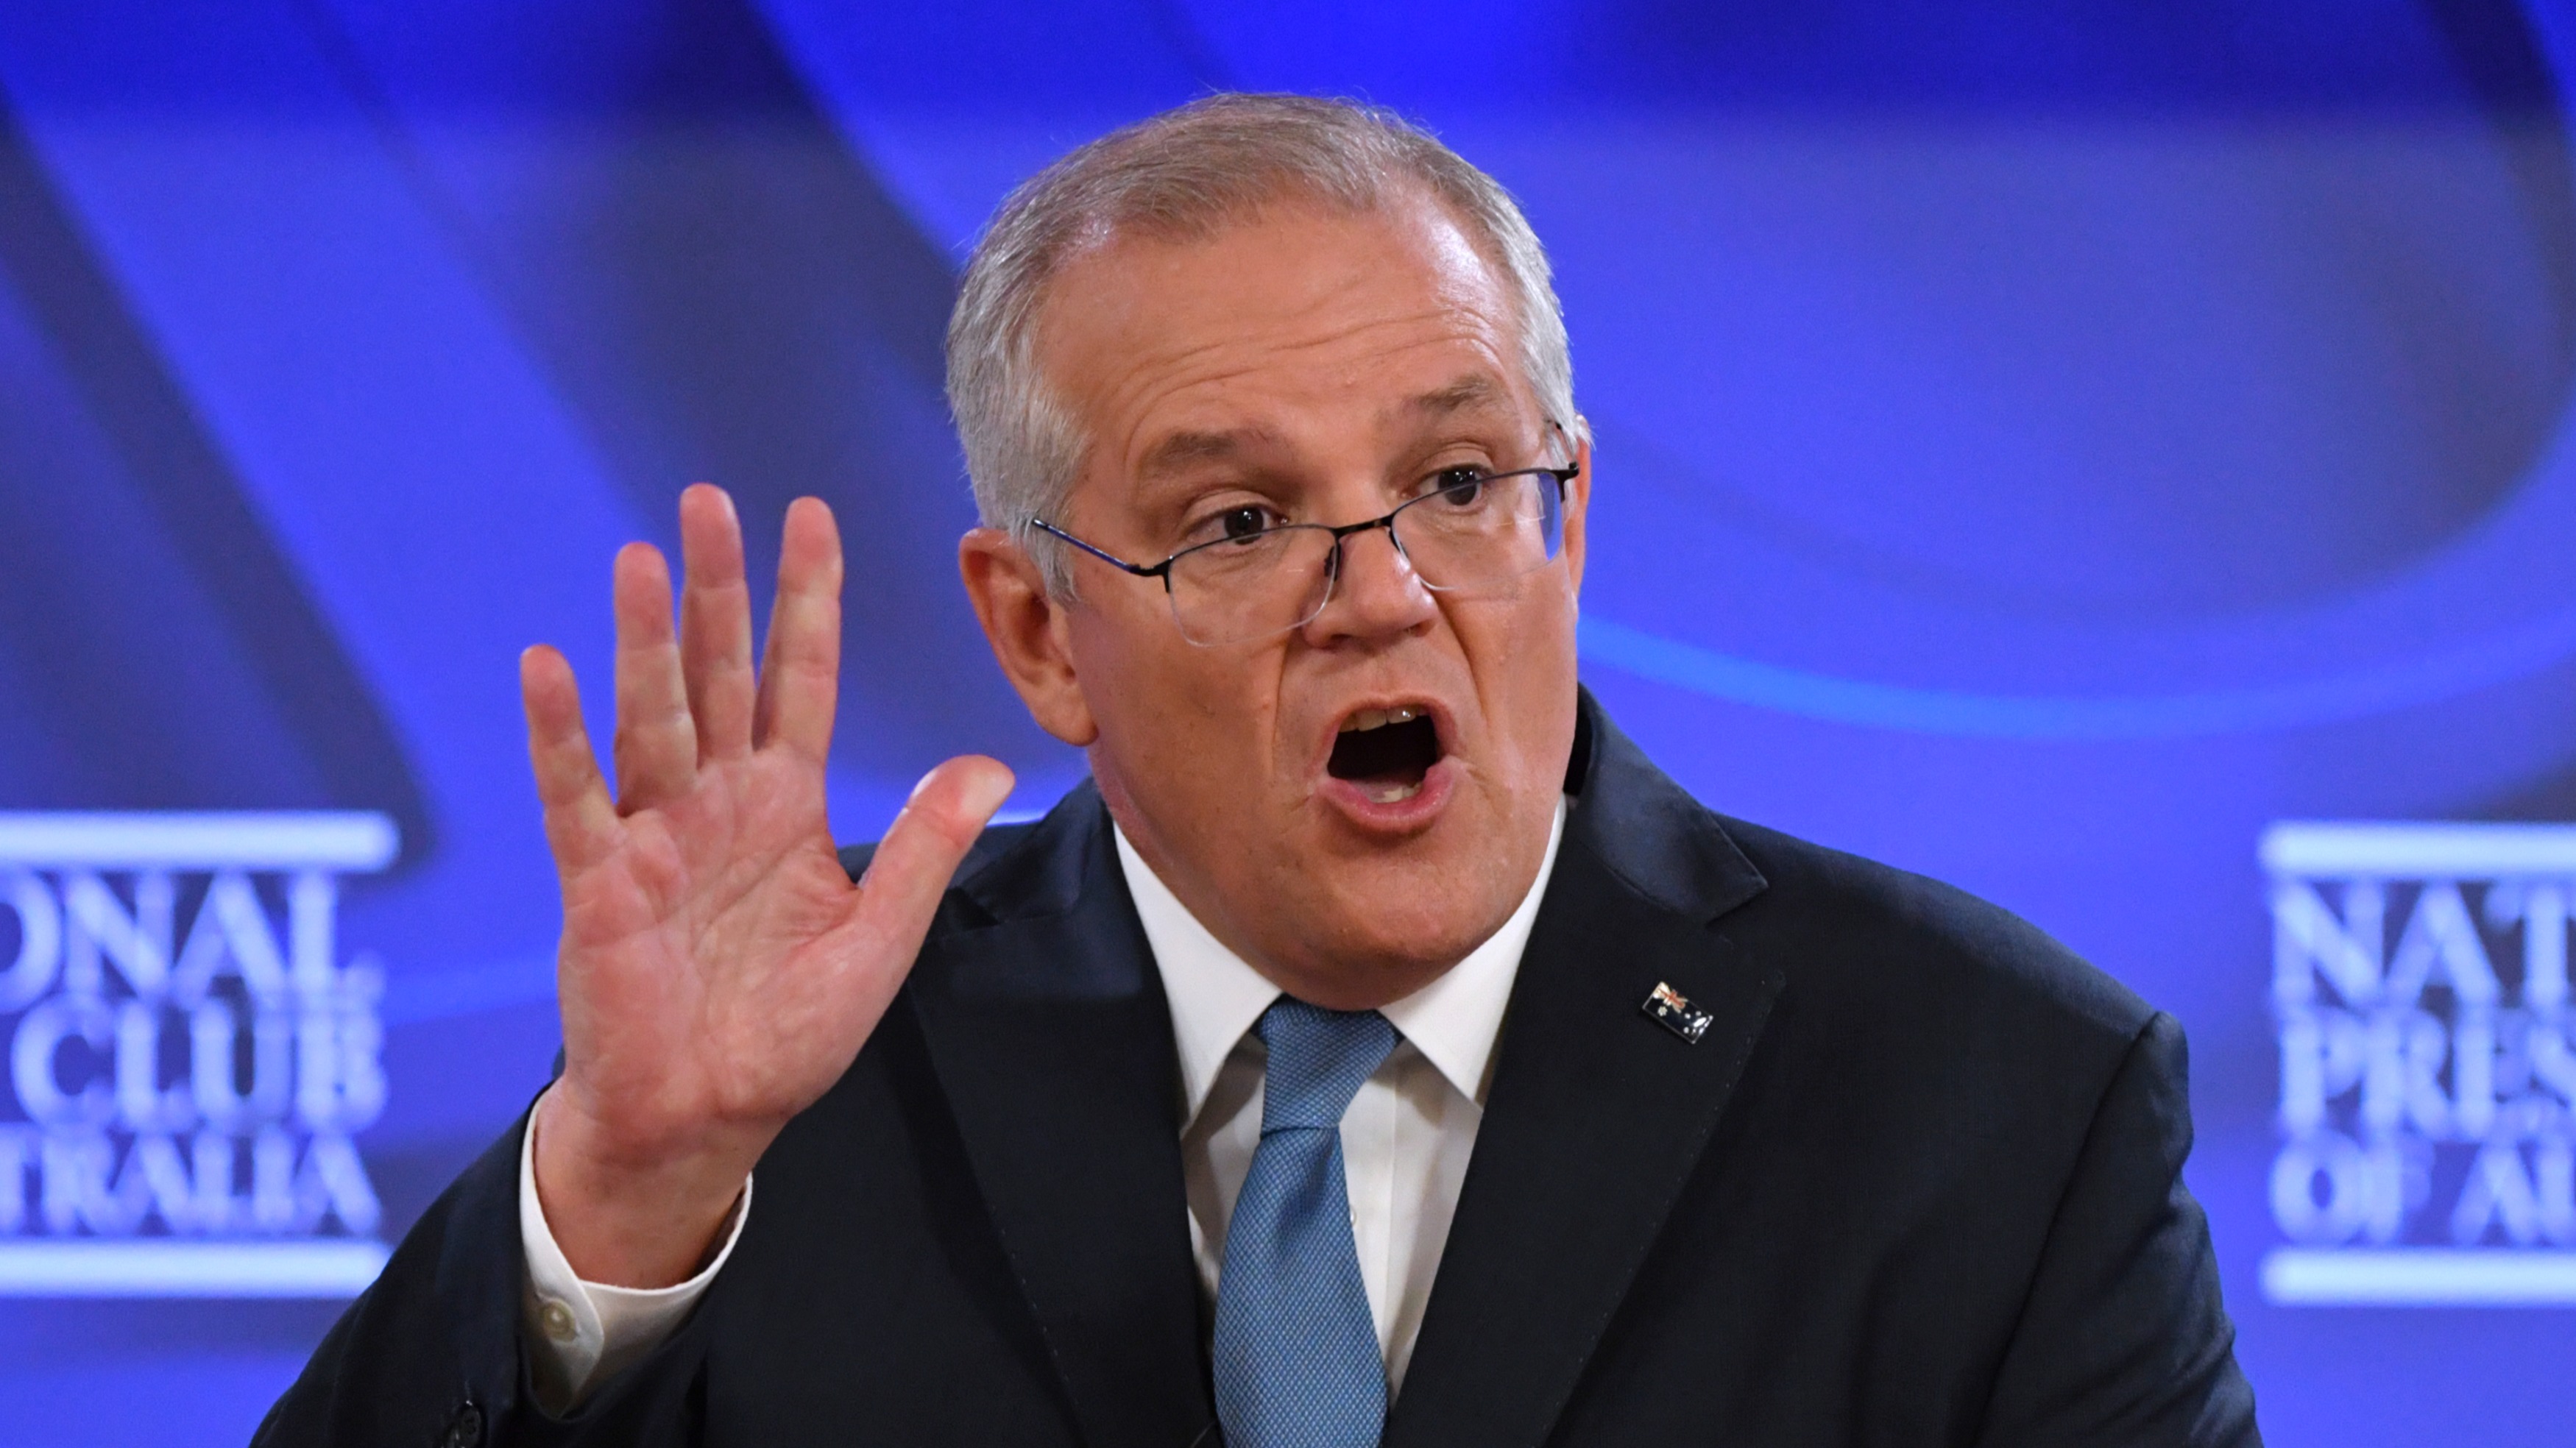 Australian PM Scott Morrison appeared to suggest that China had bribed the Solomon Islands into signing a security deal, saying it doesn't 